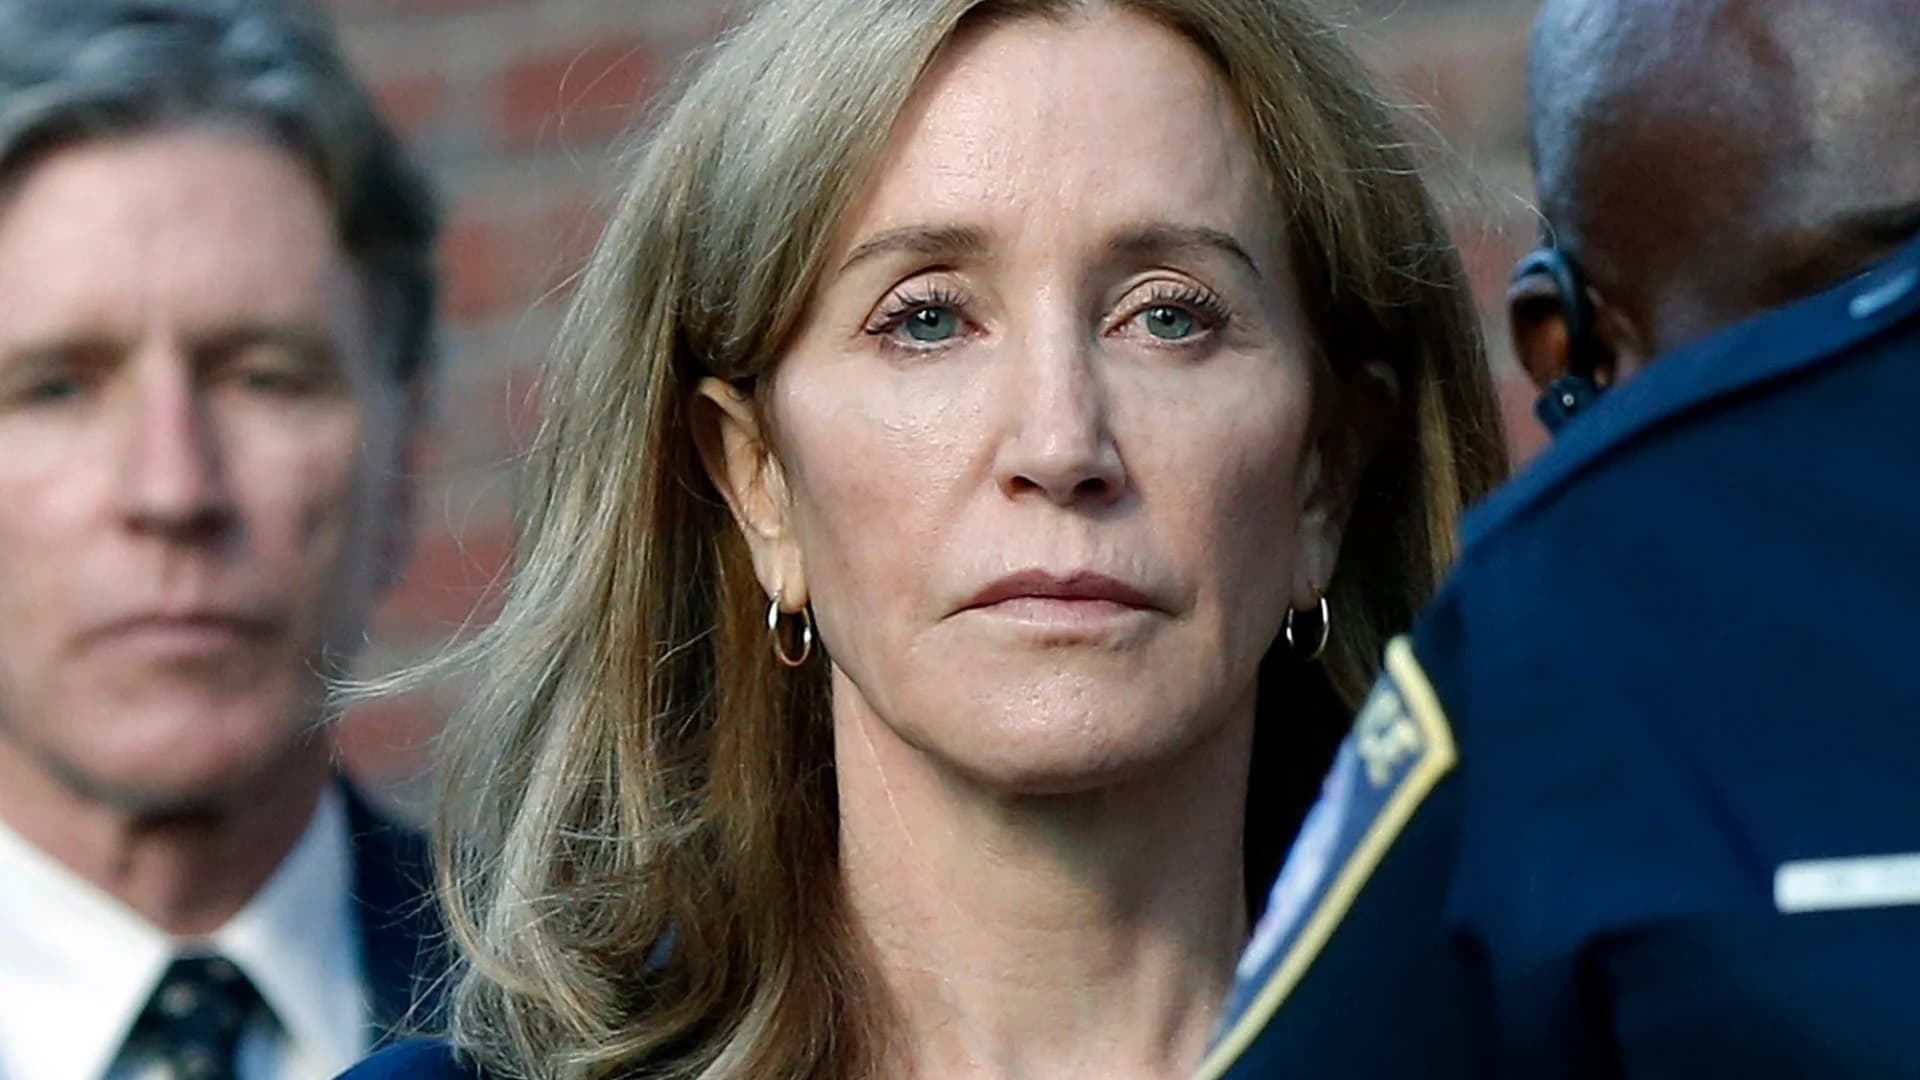 Felicity Huffman released 11 days into 14-day prison term